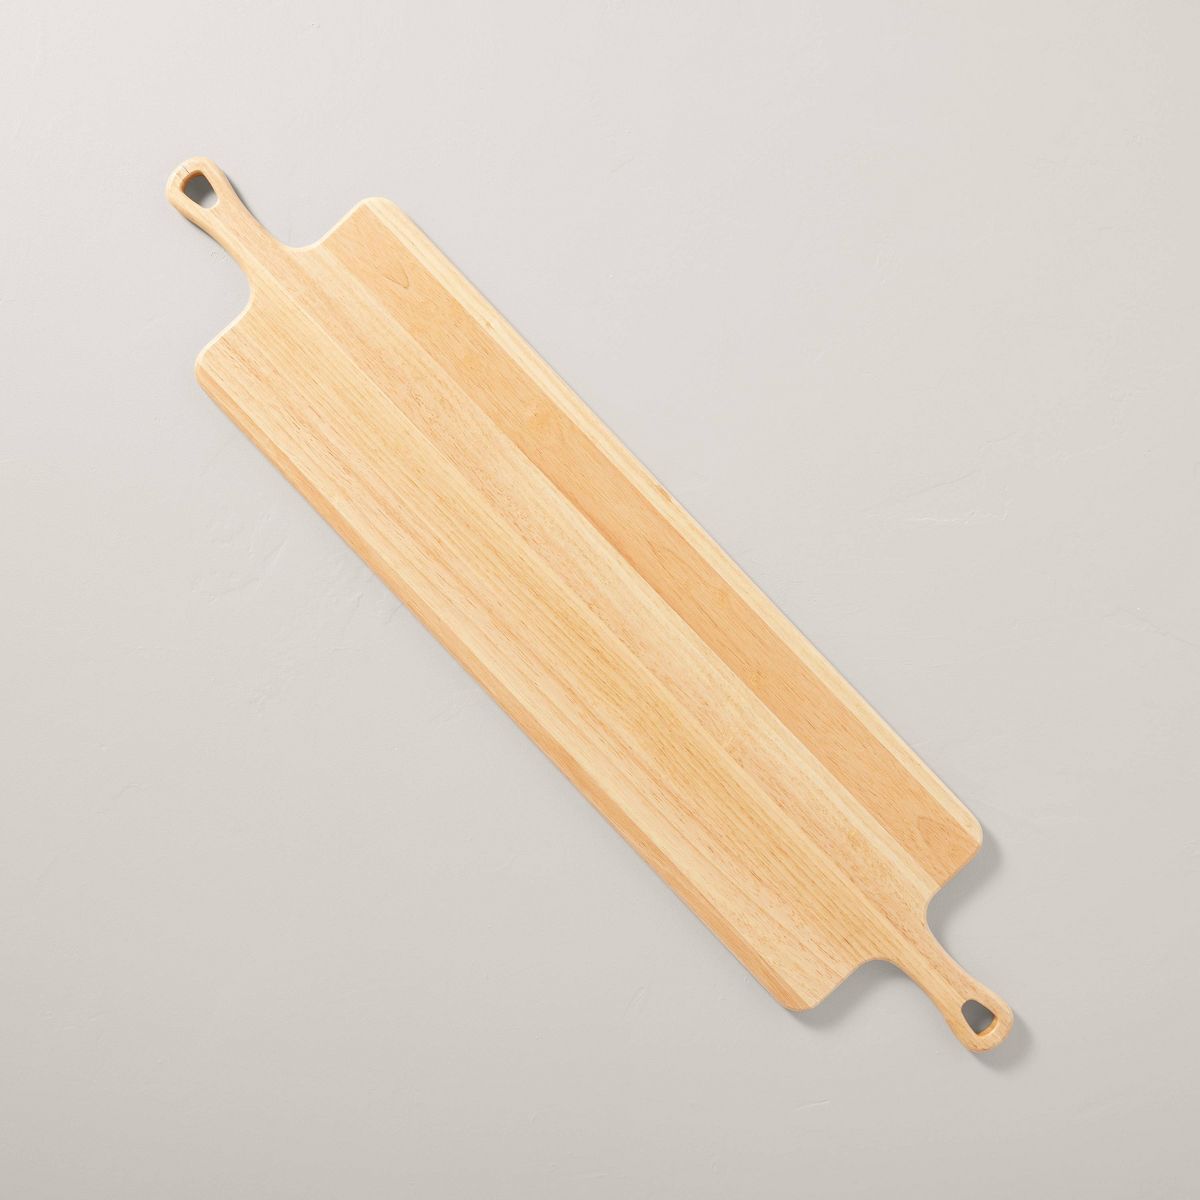 40"x9" Wooden Paddle Serving Board with Handles - Hearth & Hand™ with Magnolia | Target